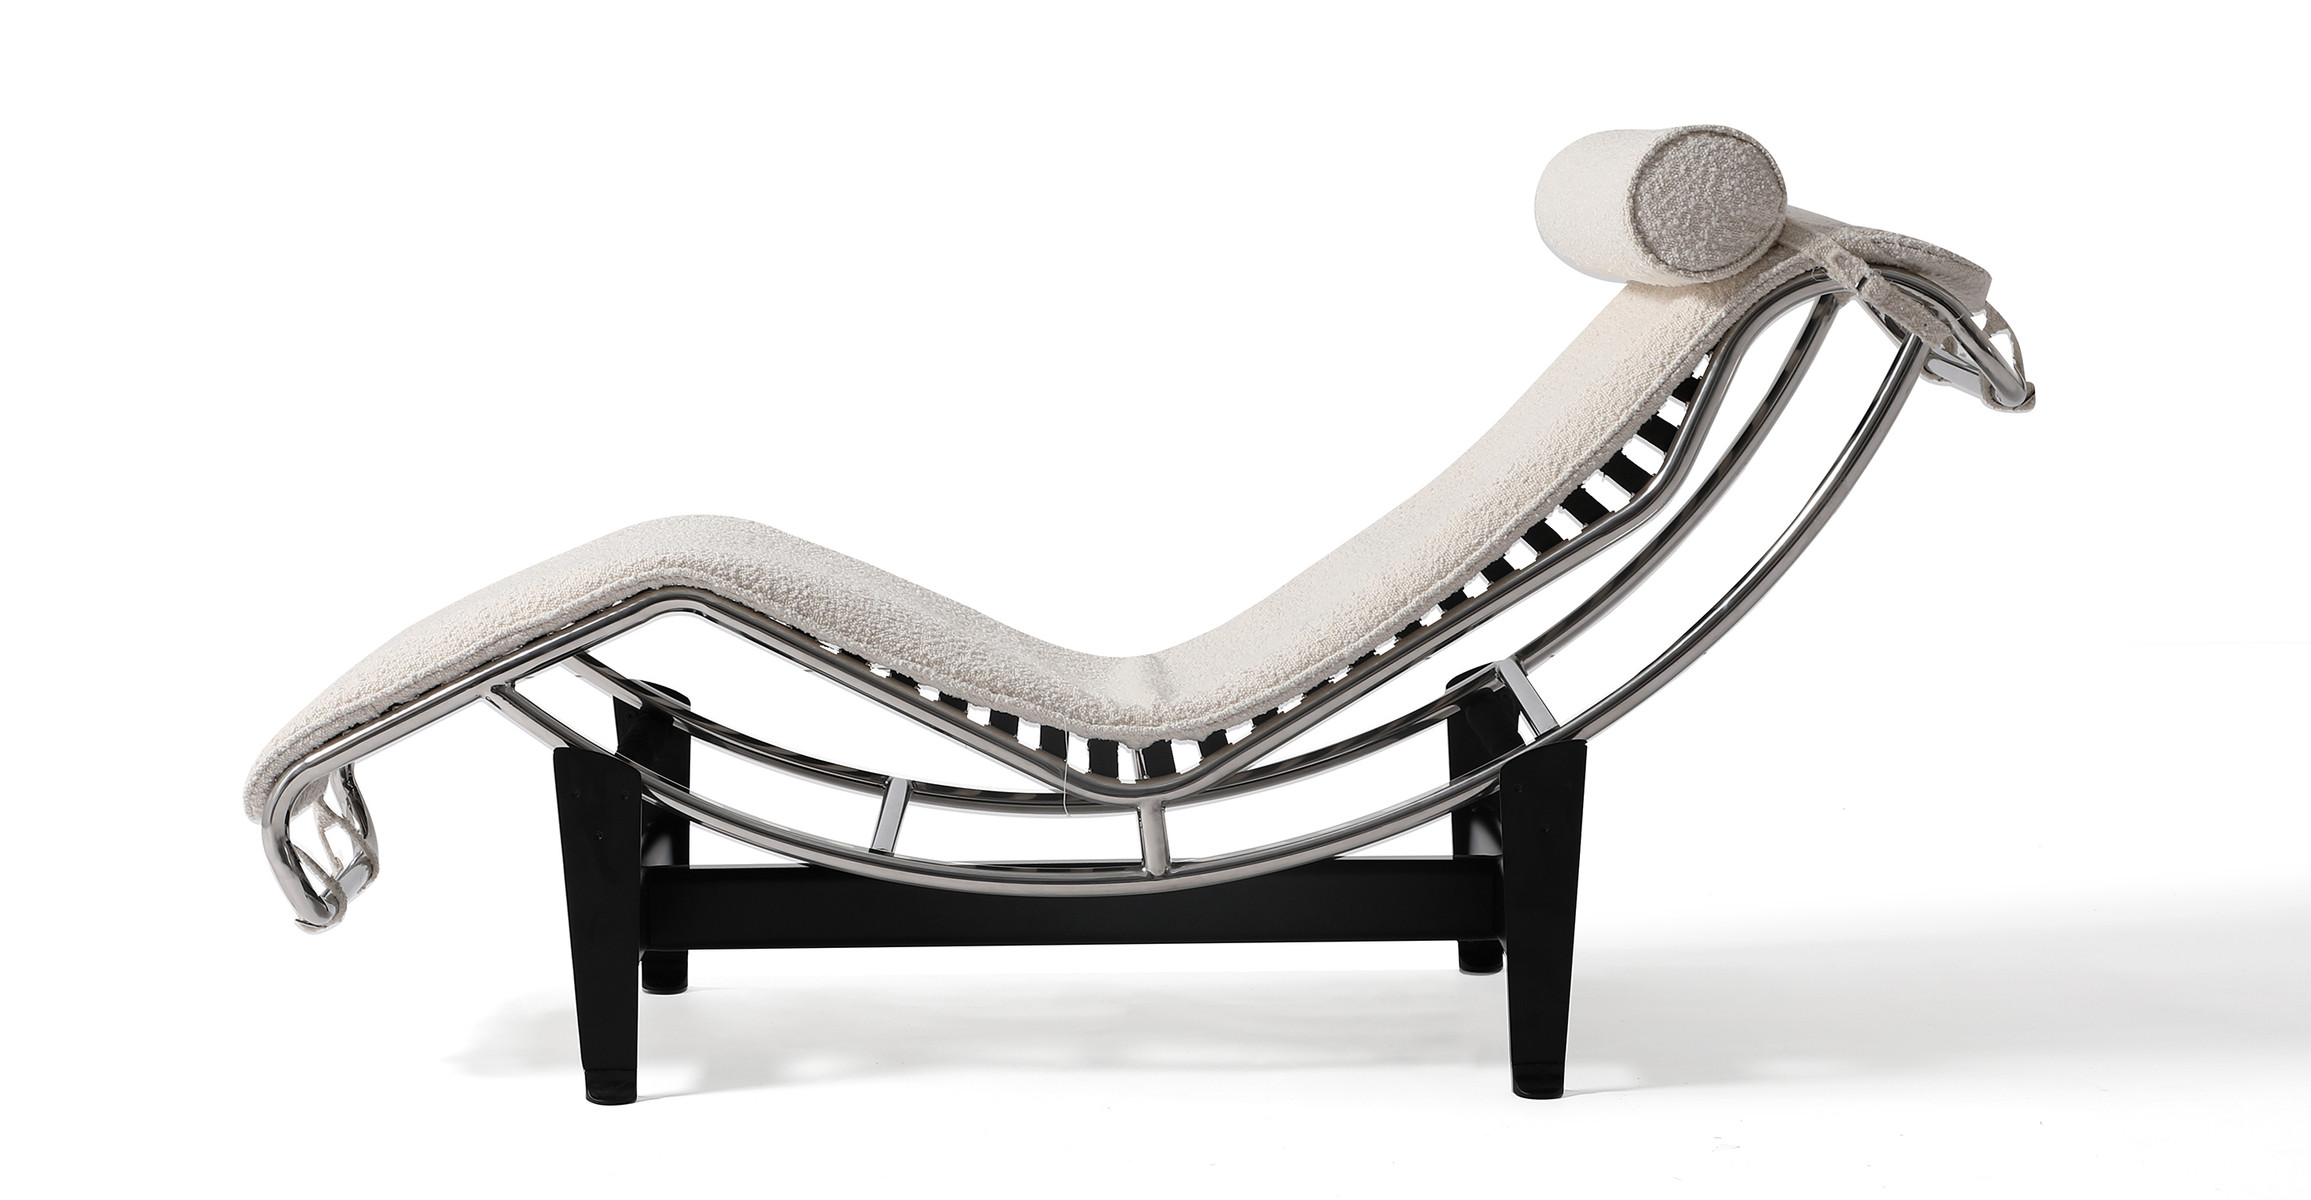 LC4 Chaise Longue Chairs Adding Chic and Ultimate Comfort to